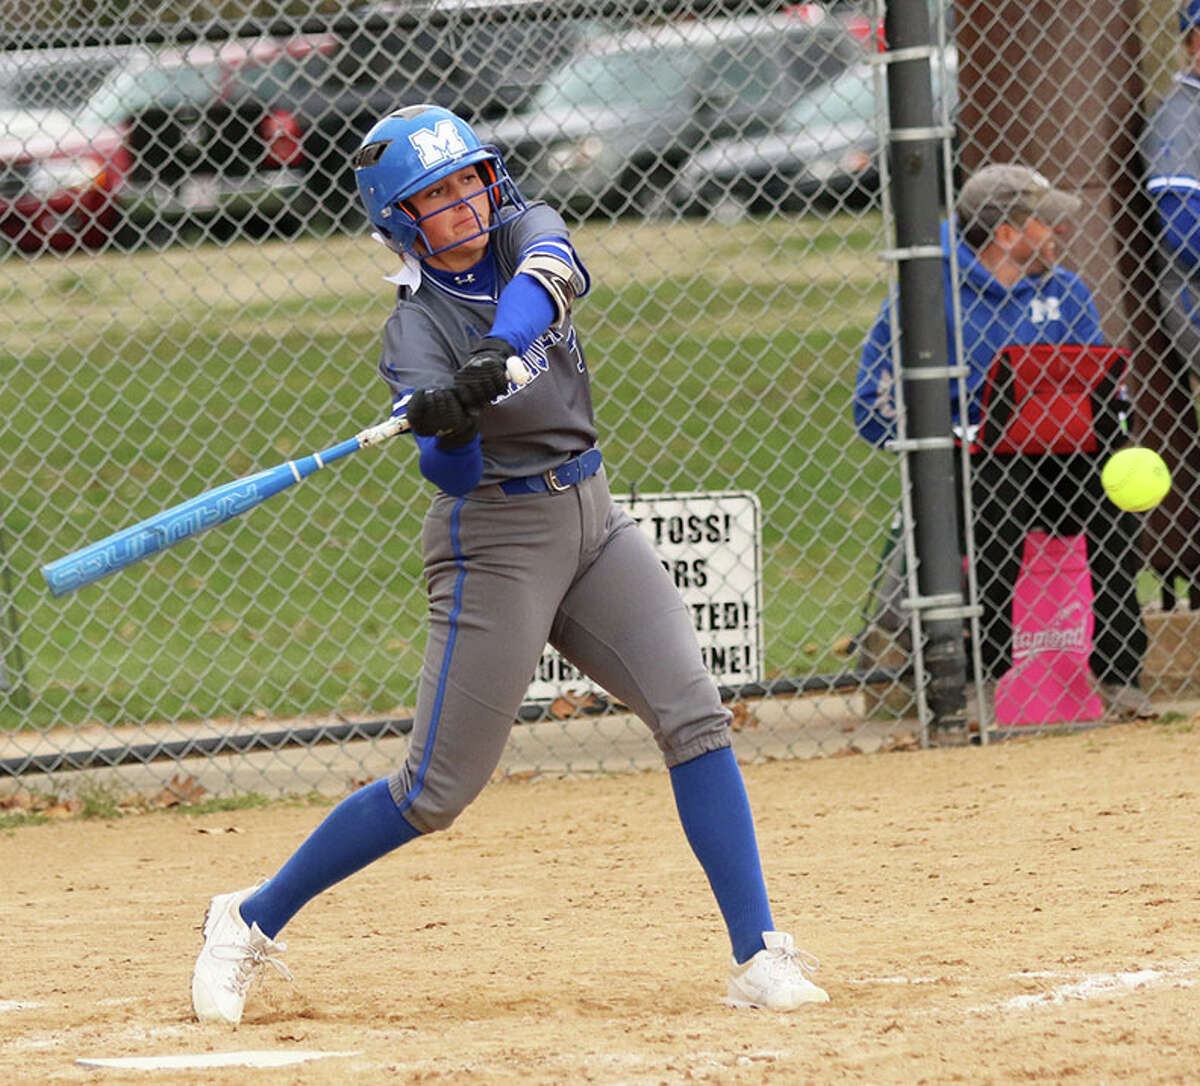 Marquette's Lauren Lenihan, shown getting a hit earlier this season at Moore Park, had homered and drove in five runs along with getting the win in the Explorers' 12-2 win over Columbia in a Class 2A regional semifinal in Alton.